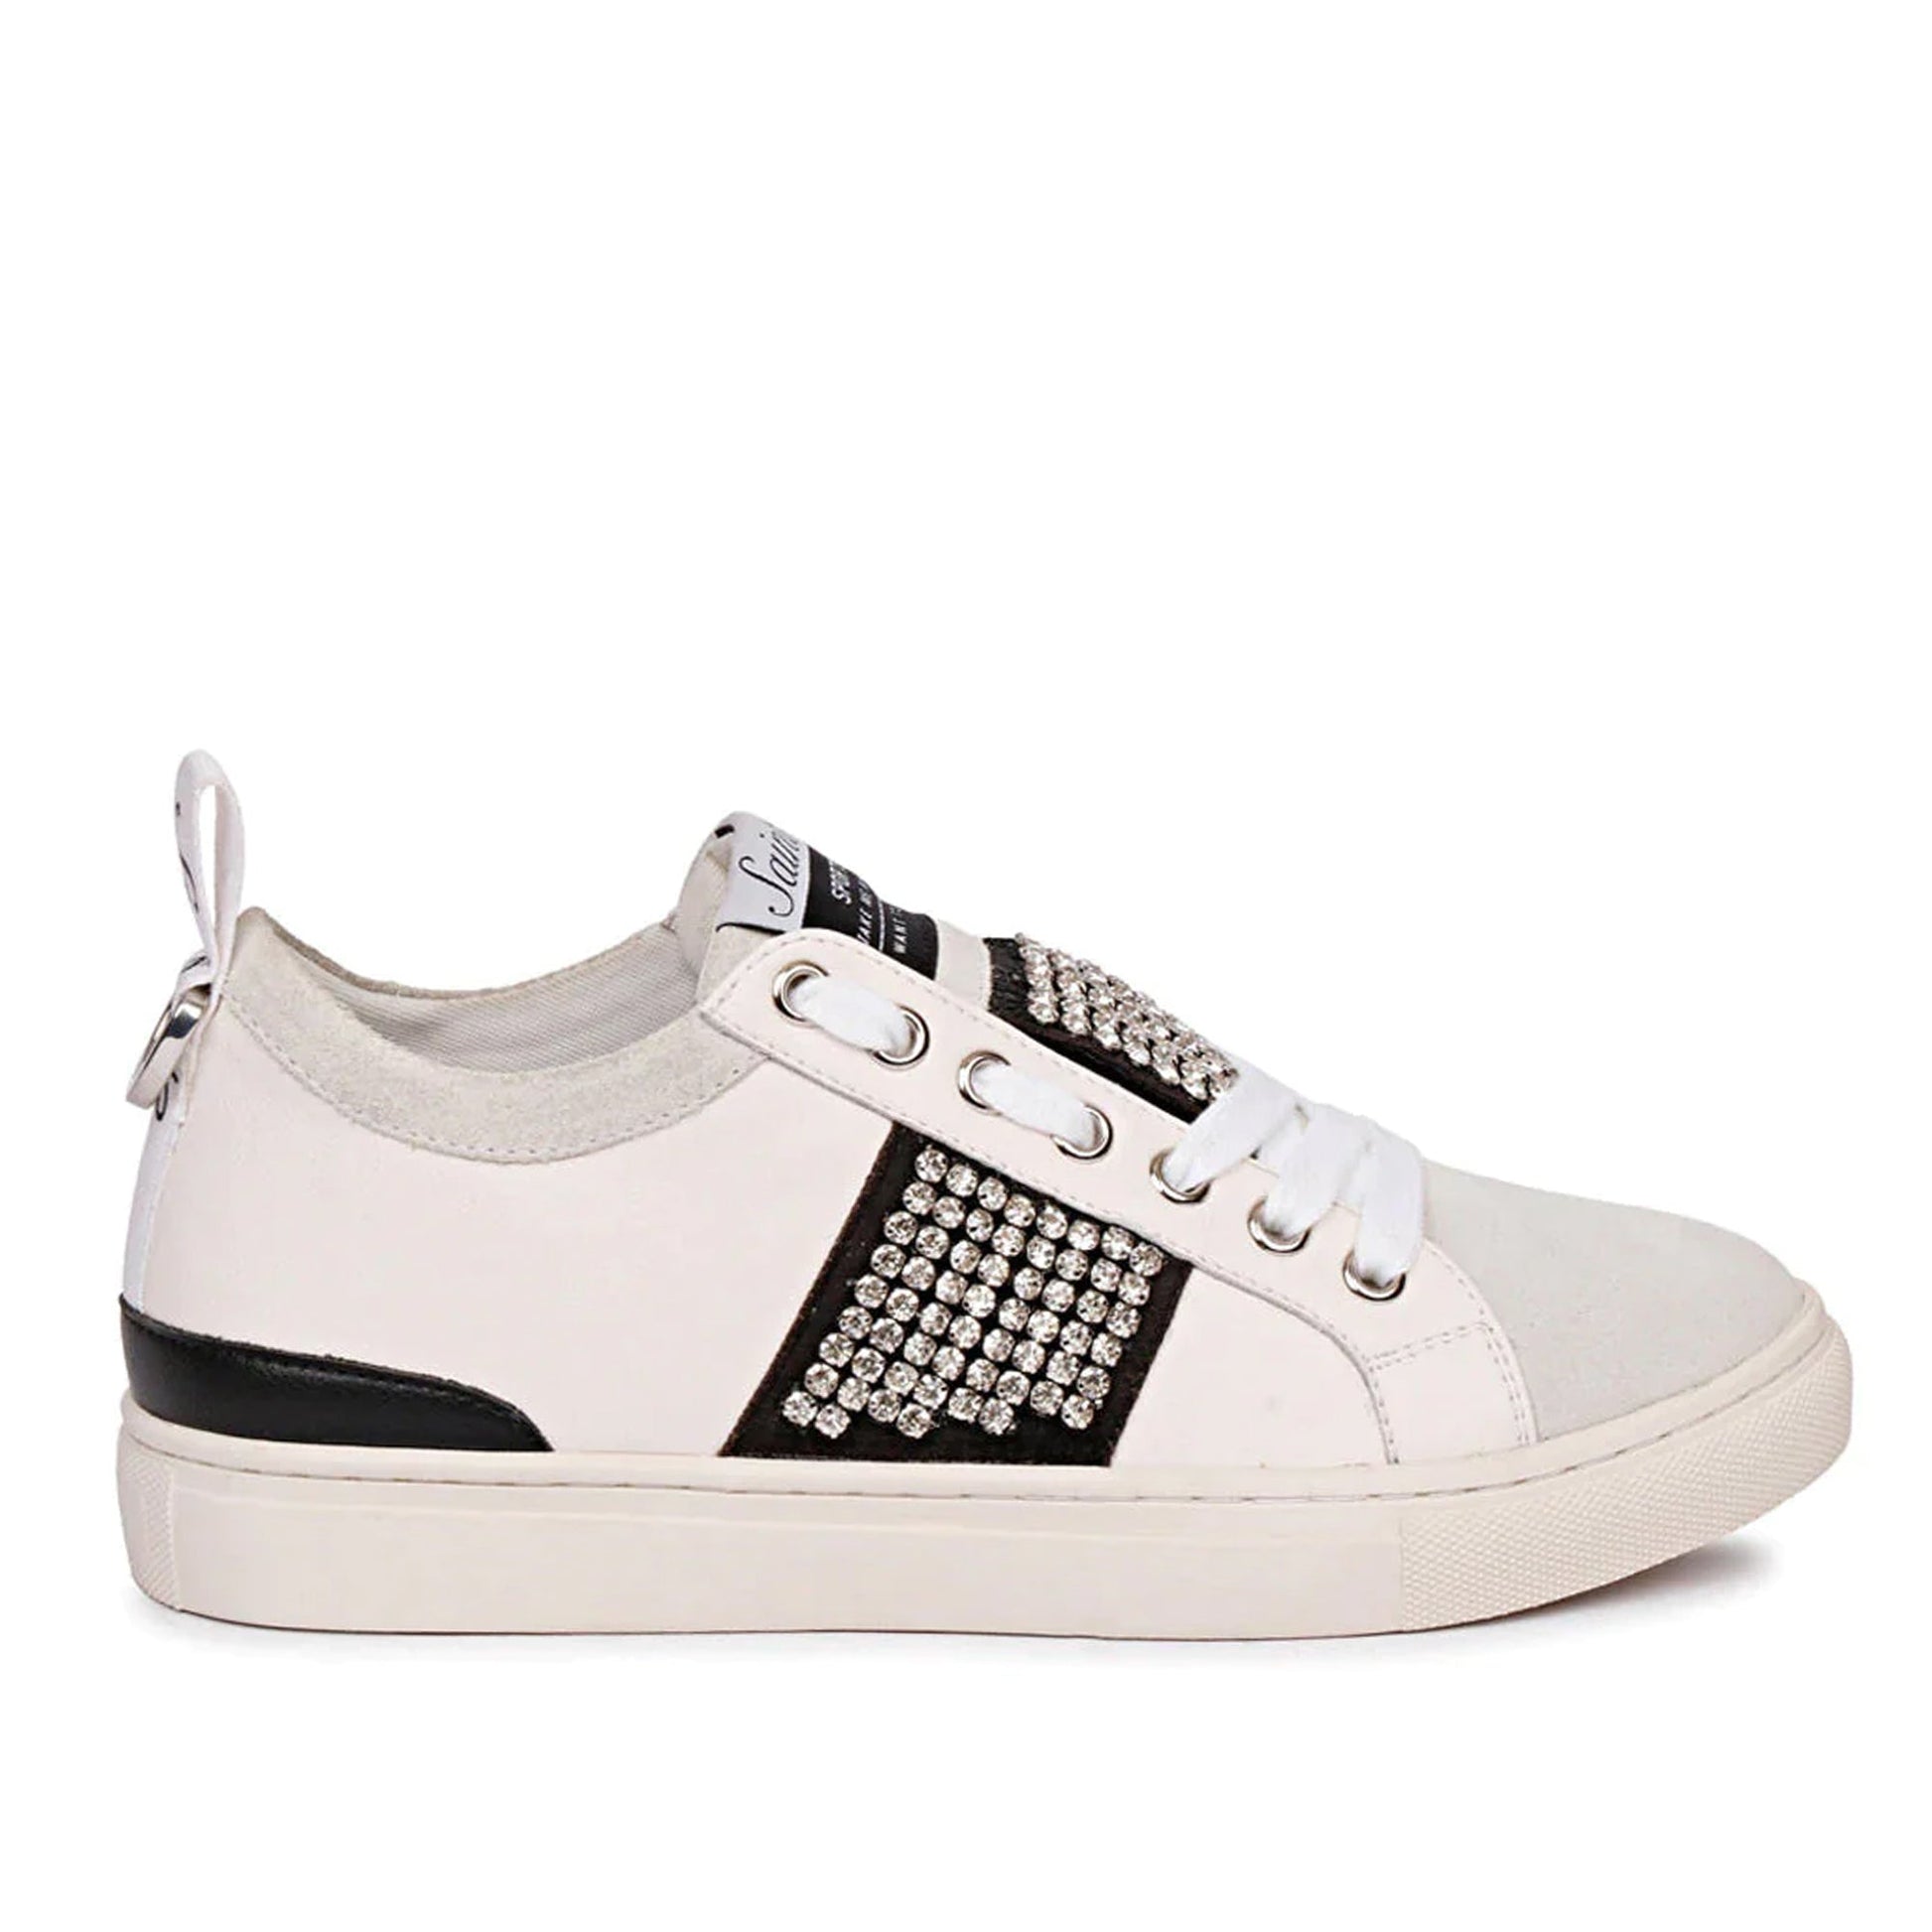 Whitesta Janet Off White Leather Sneakers - Stylish and comfortable footwear for a trendy look. Elevate your fashion with these chic off-white sneakers.